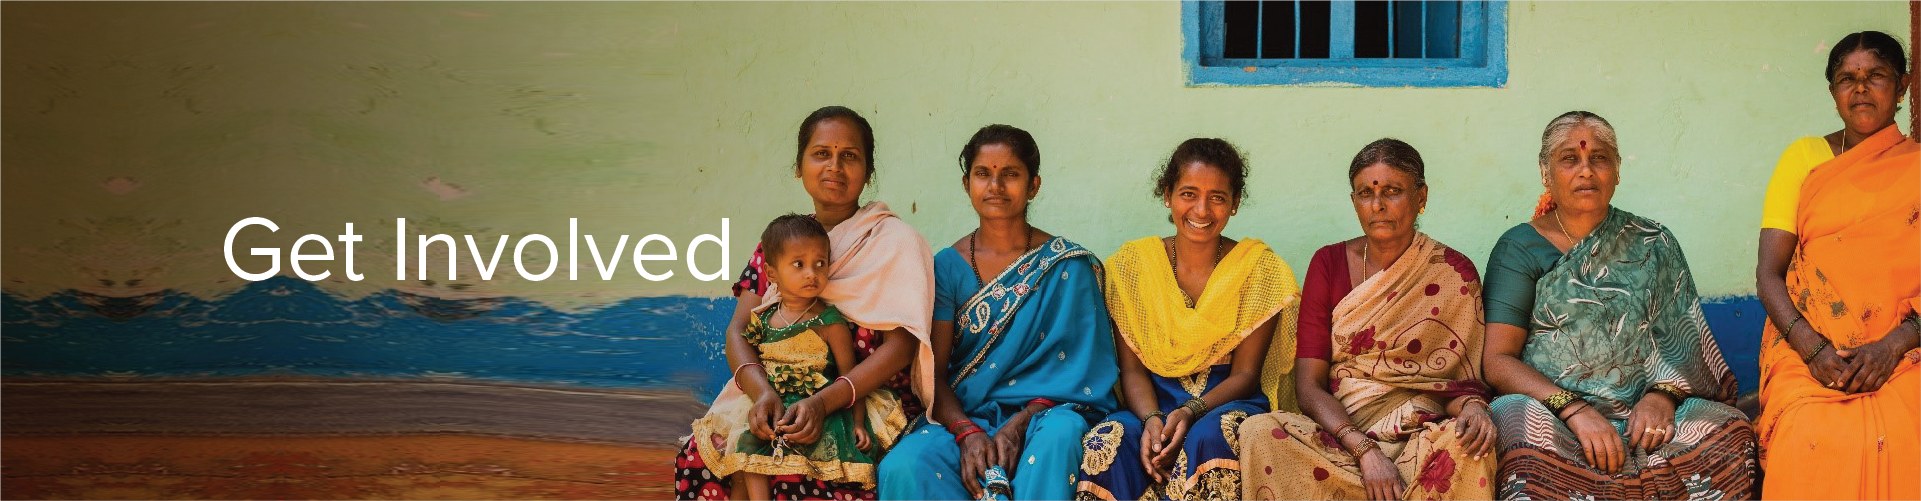 Get Involved - Reimagining India’s Health System - The Lancet Citizens’ Commission